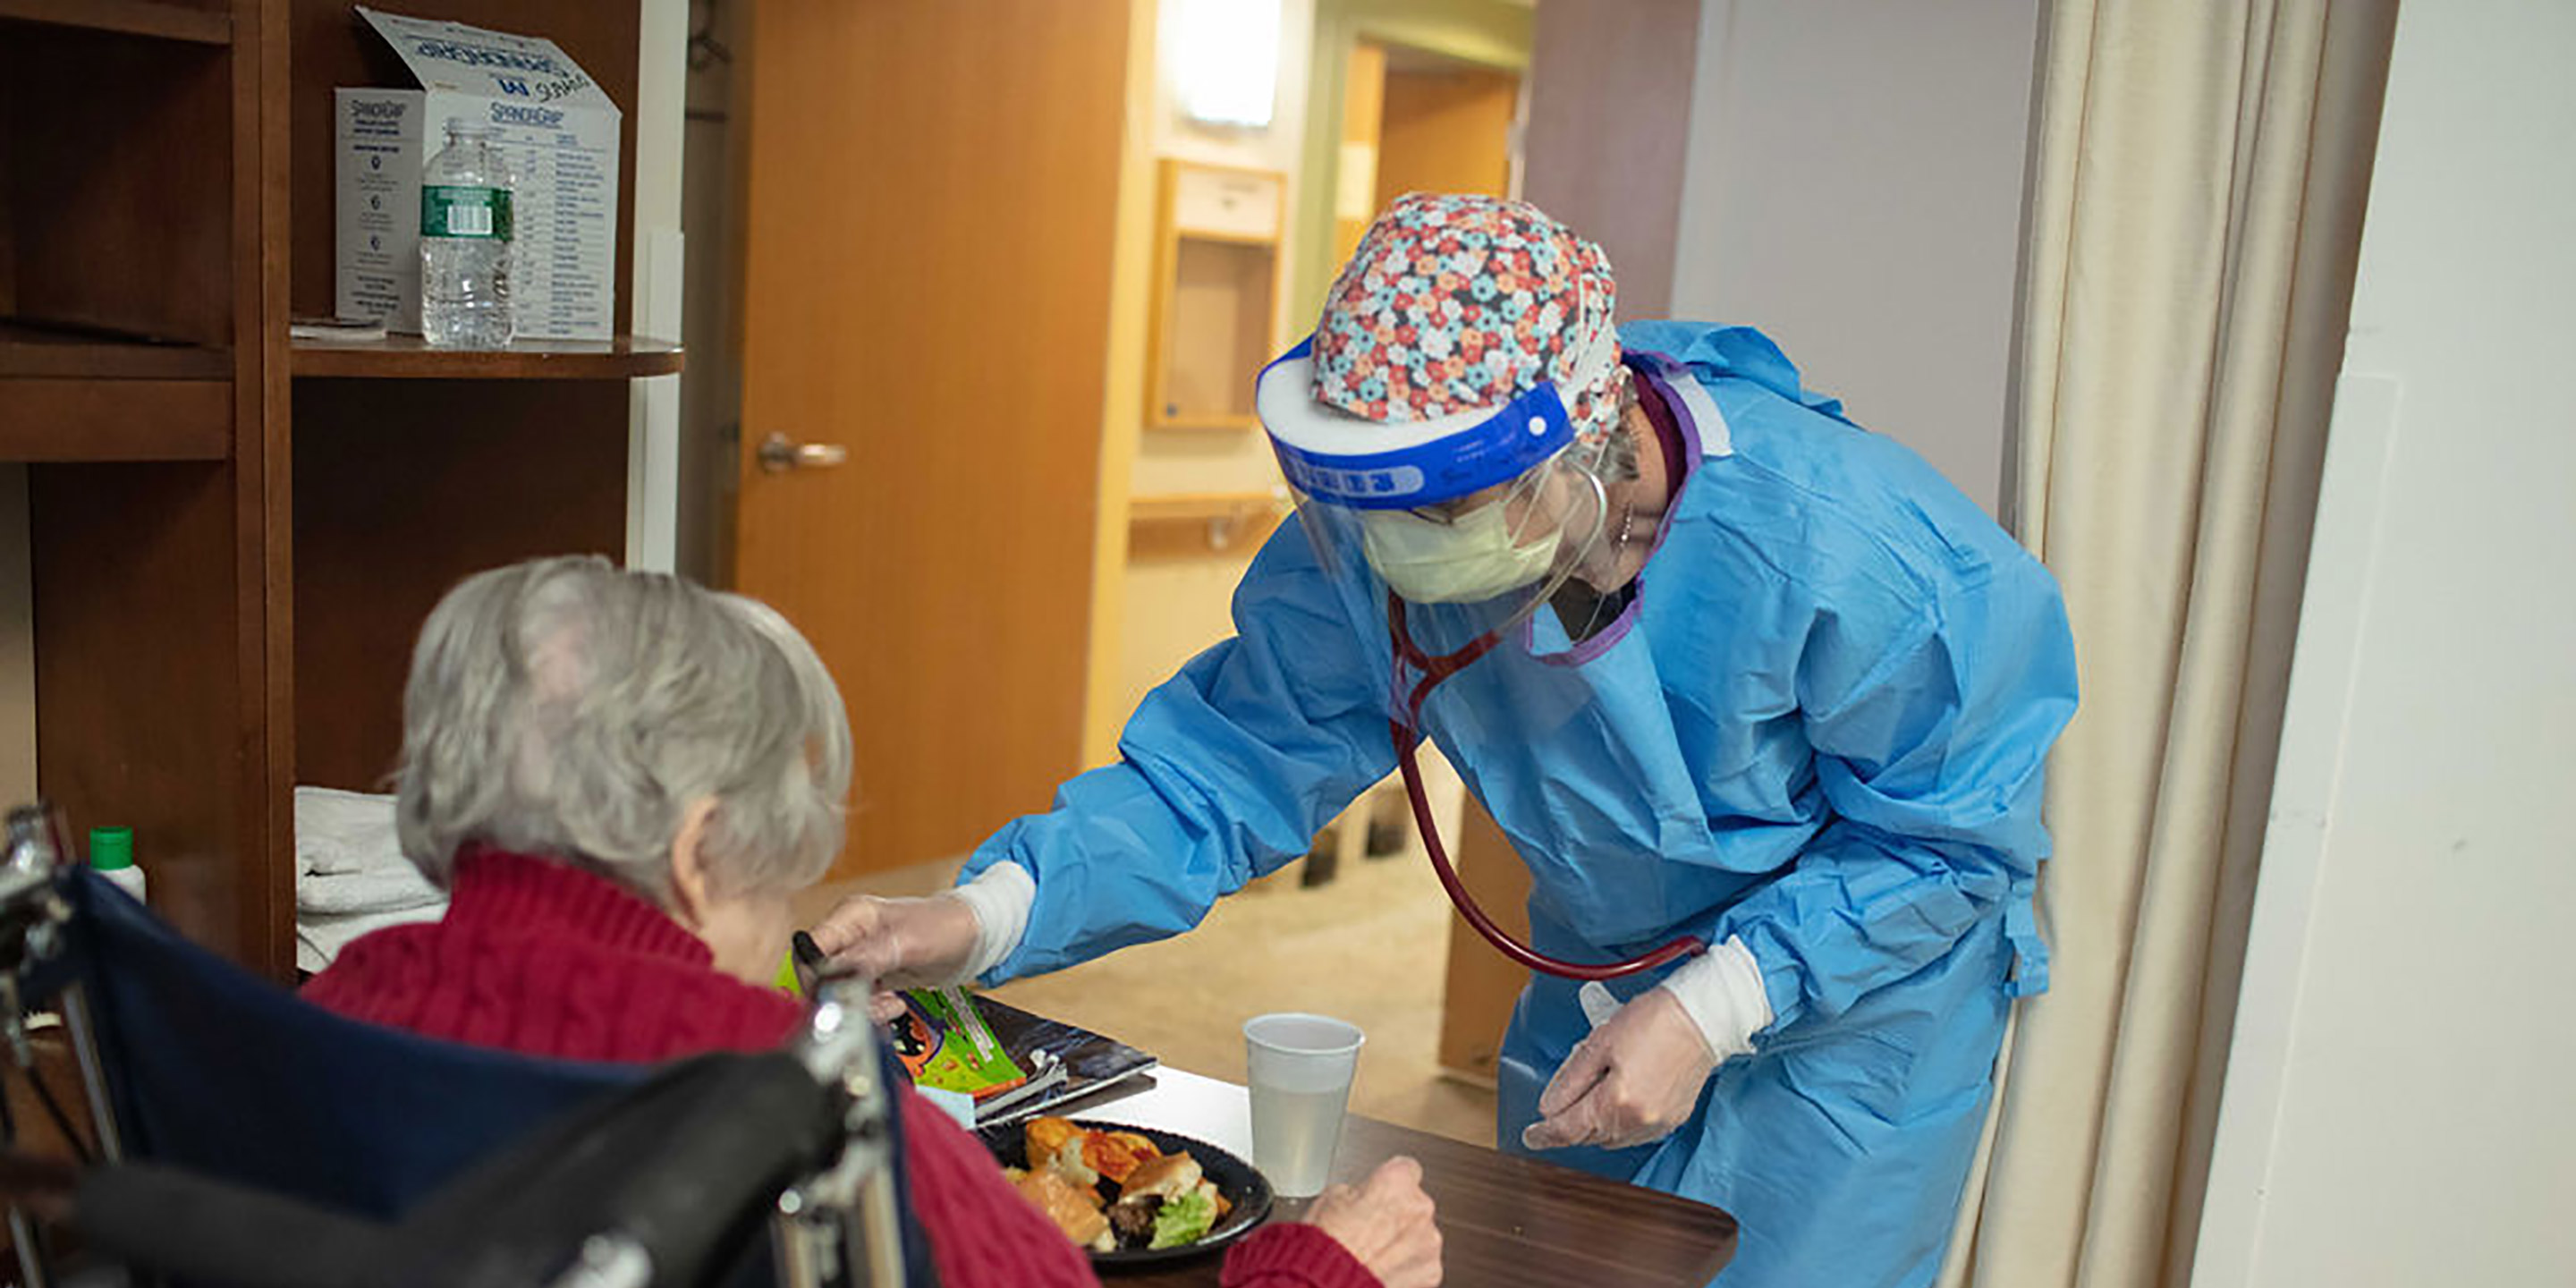 A NewBridge employee wears PPE while checking a resident's vitals.